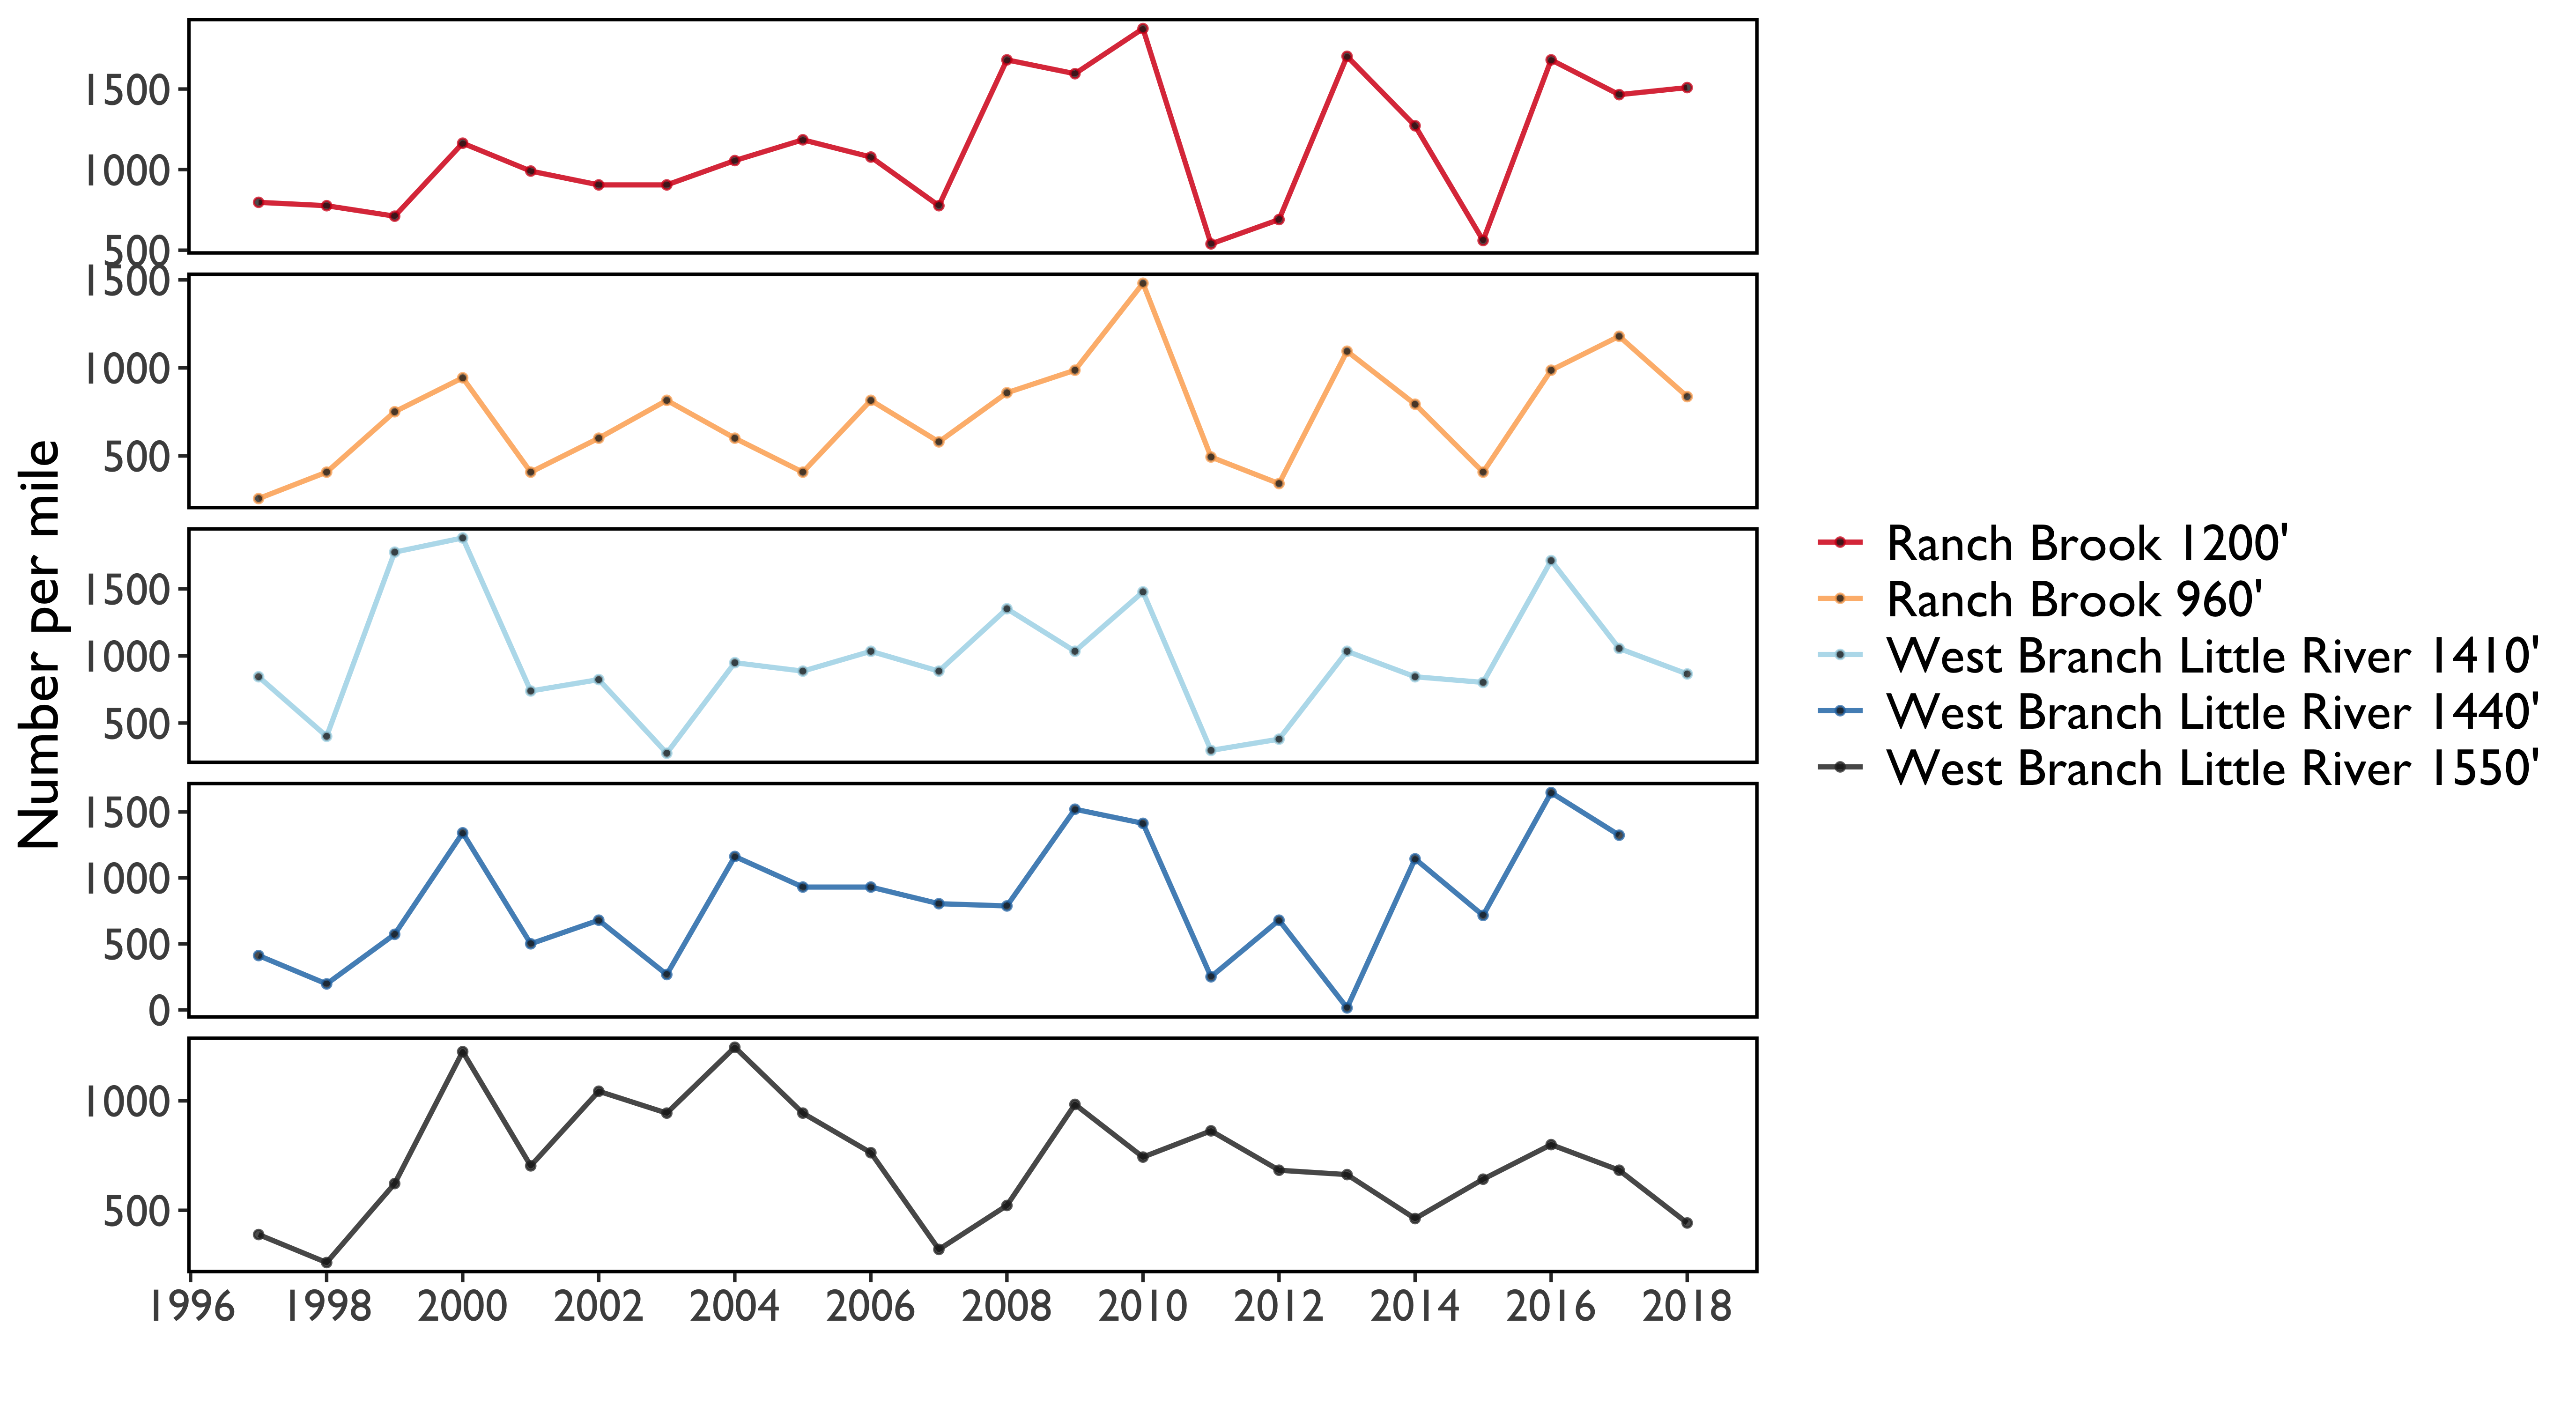 Figure 21. Vermont Department of Fish and Wildlife trout surveys: Yearlings and older fish, expressed as number per mile, from 1997 through 2017.